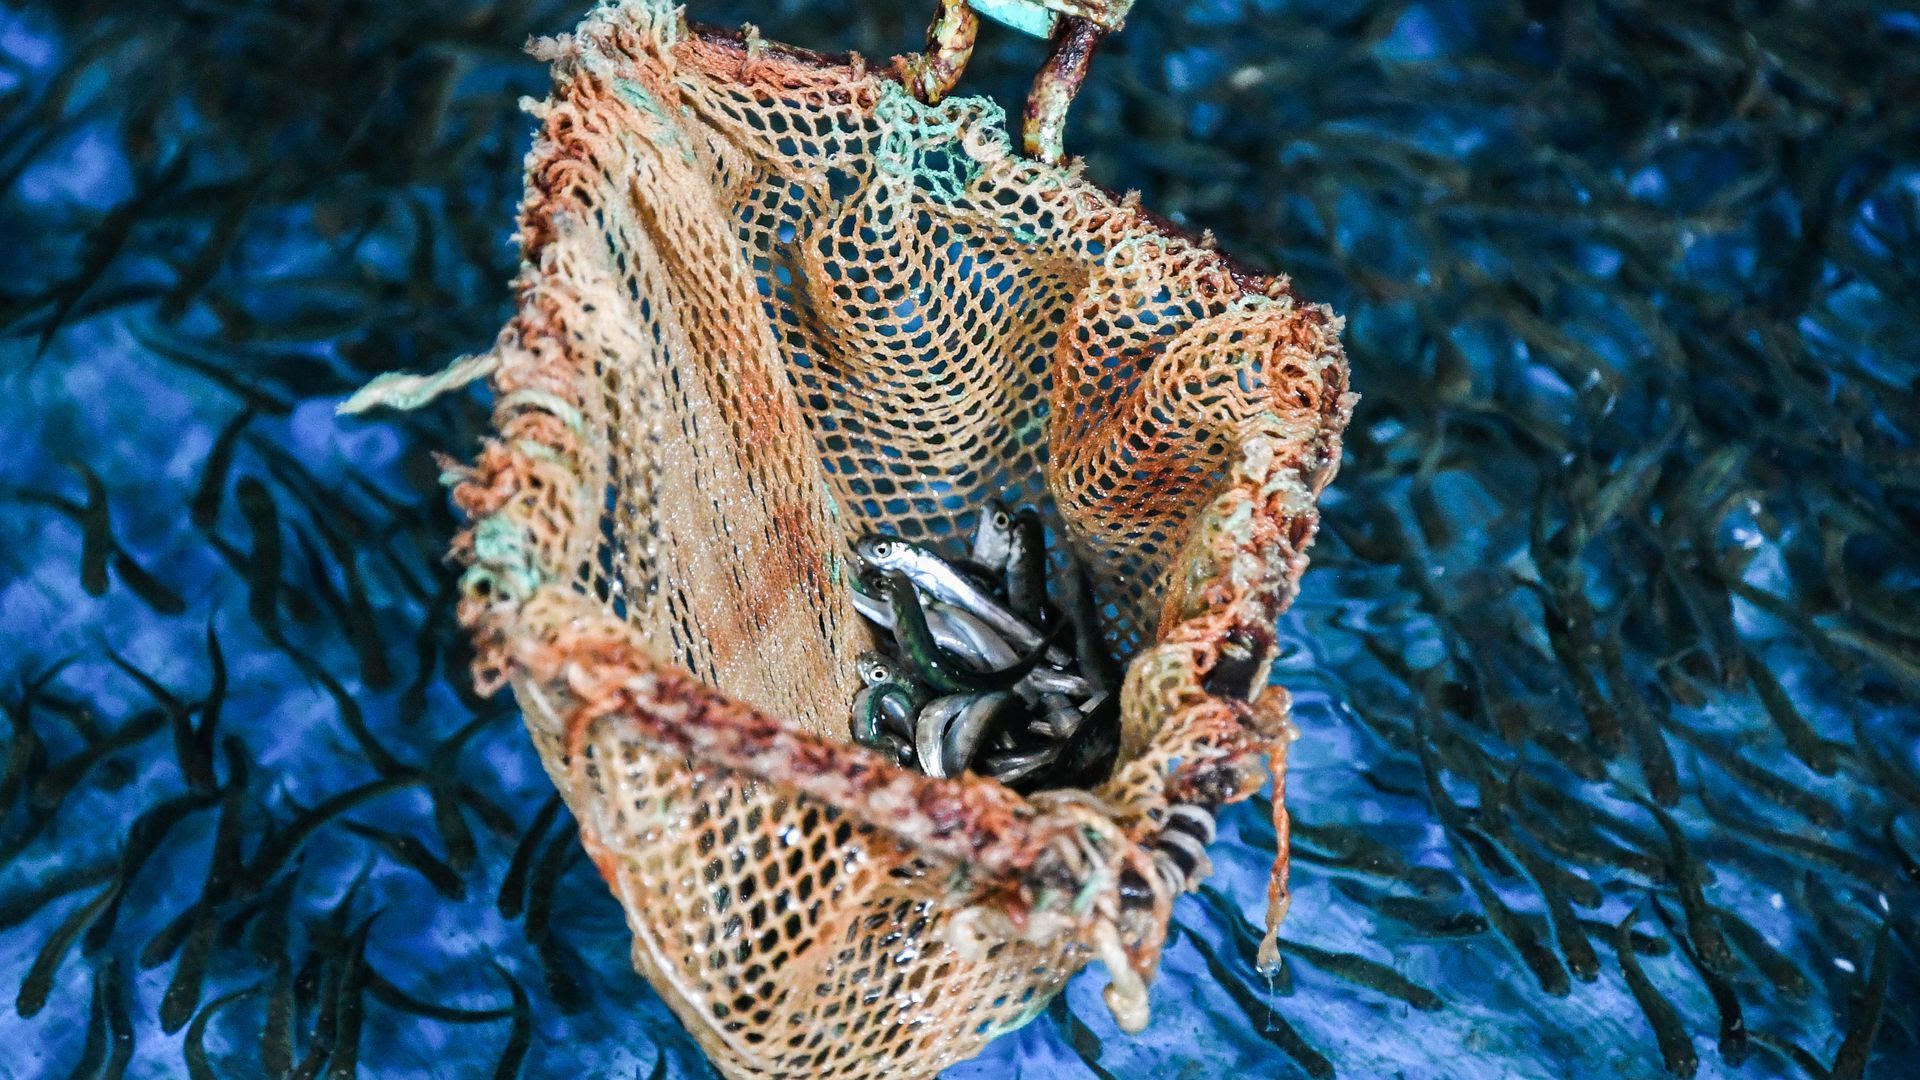 Fish captured in a net